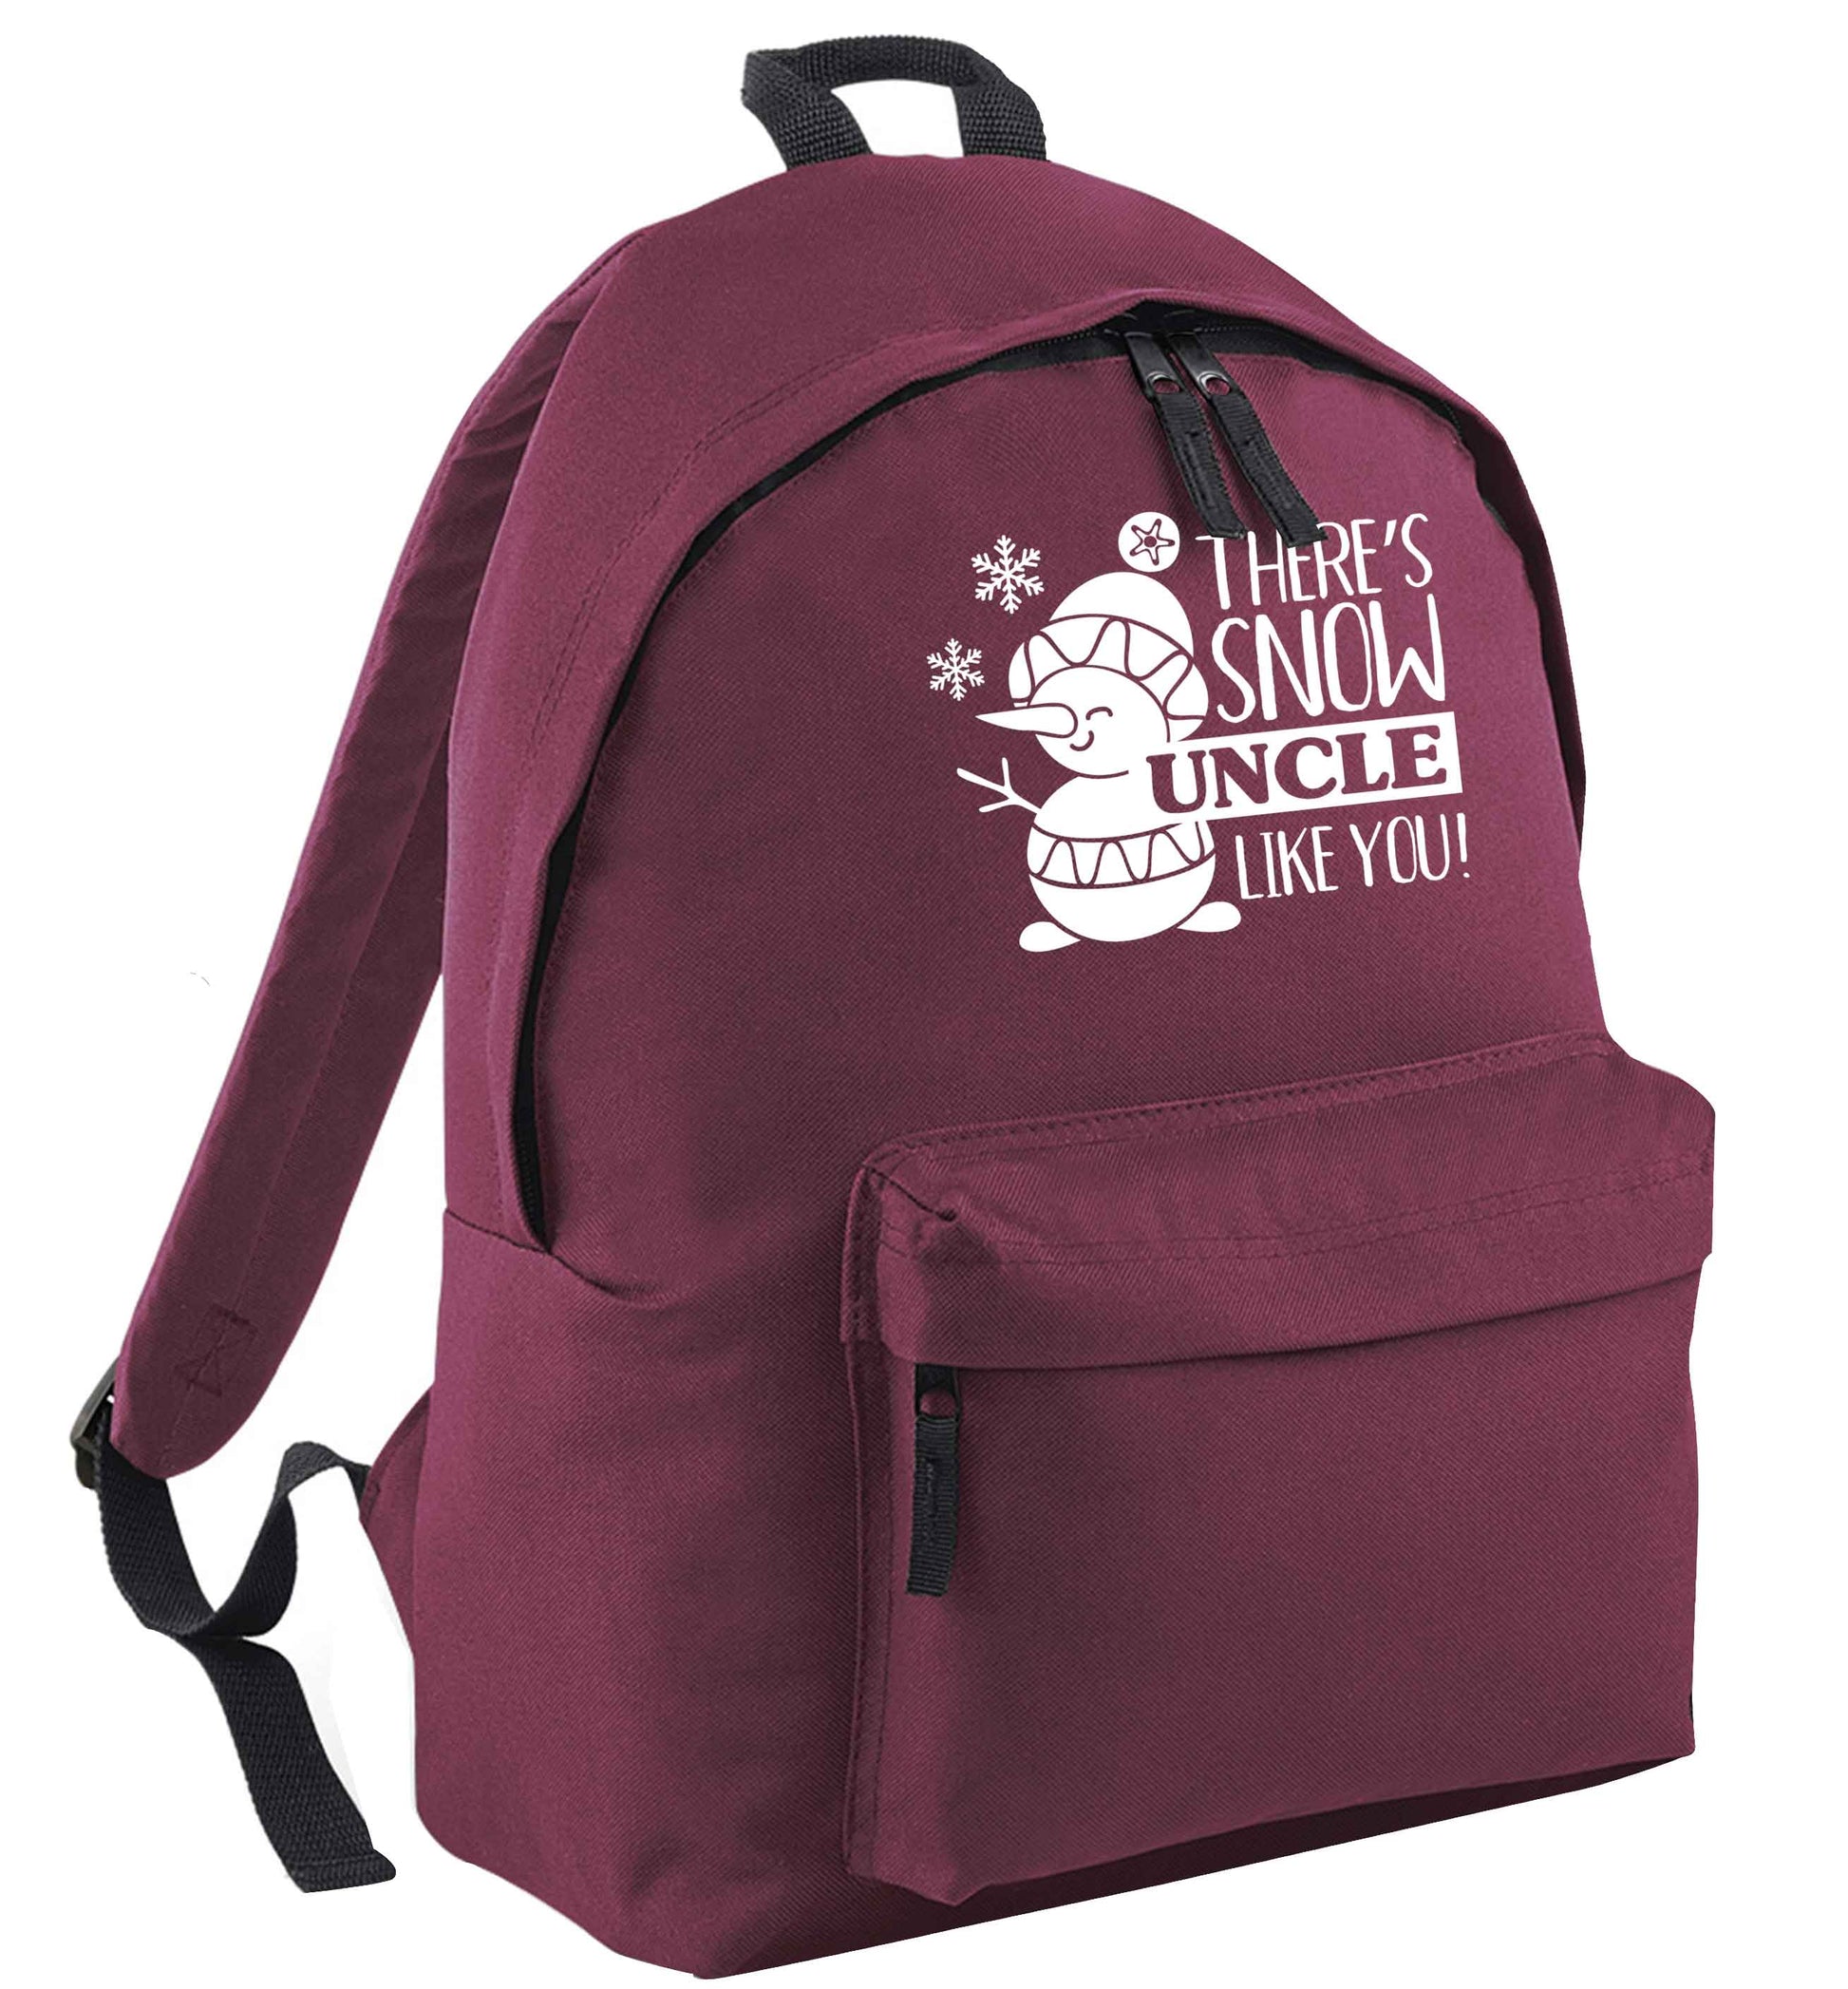 There's snow uncle like you maroon adults backpack